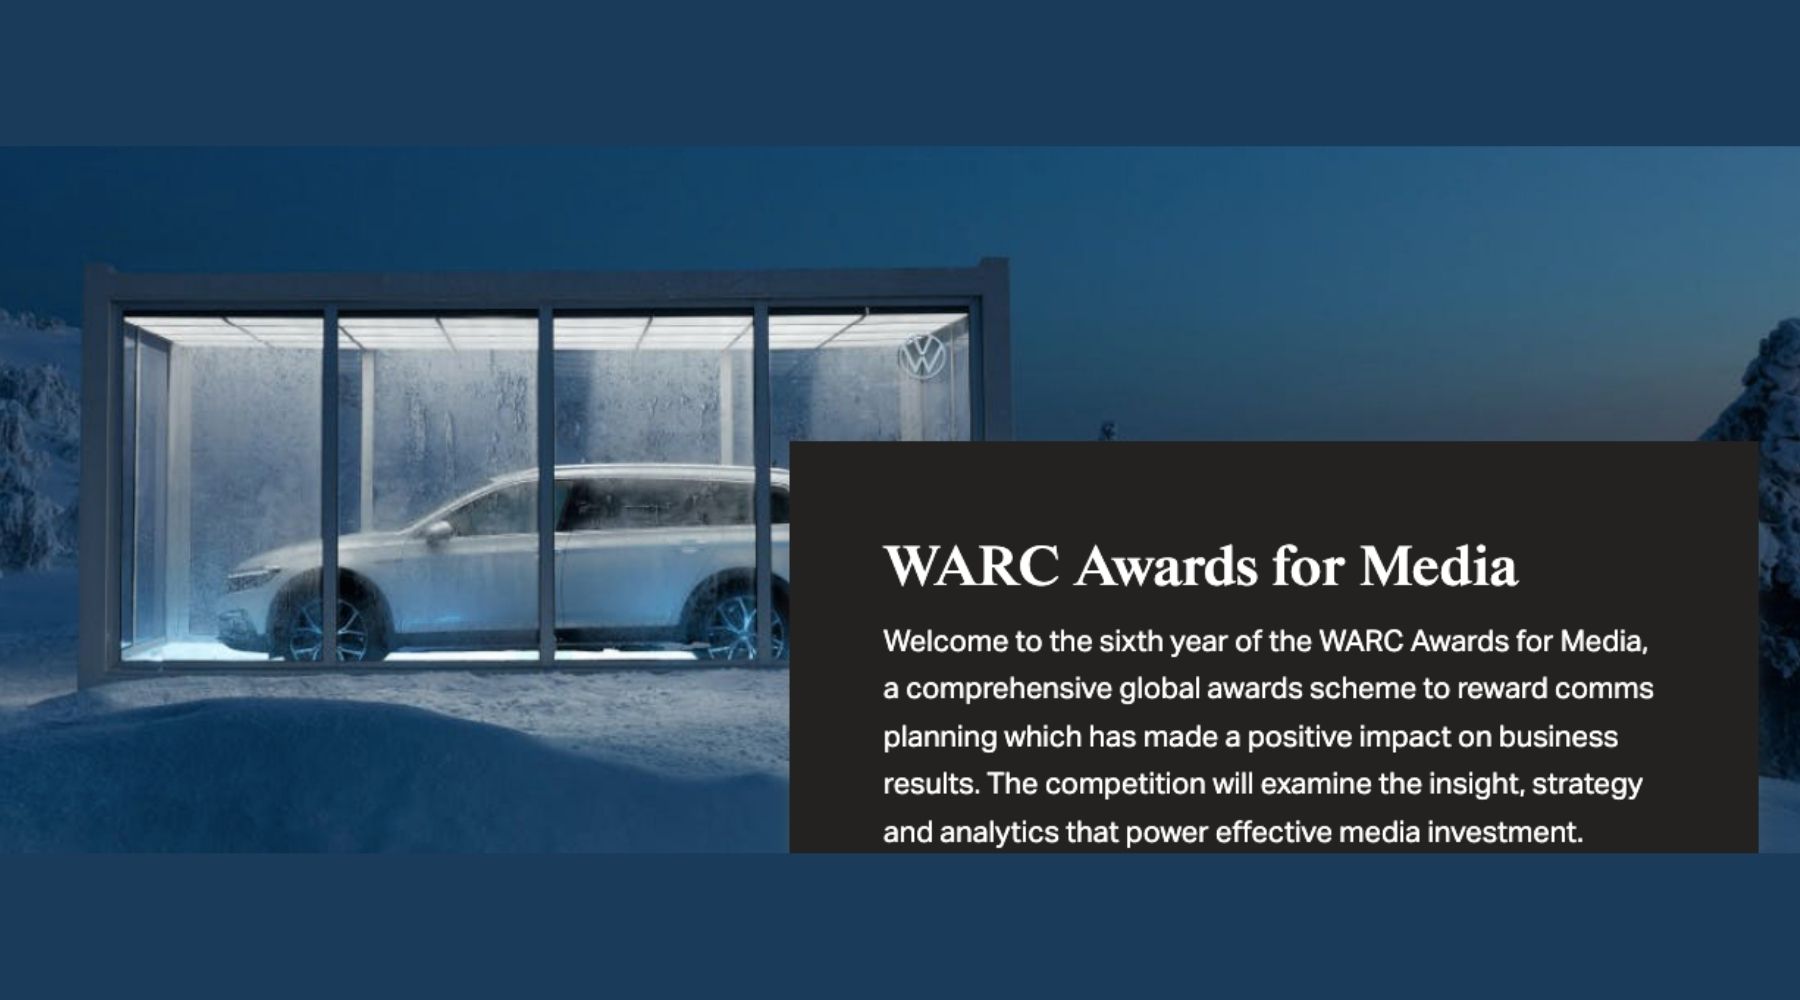 warc-awards-for-media-2021-winners-announced